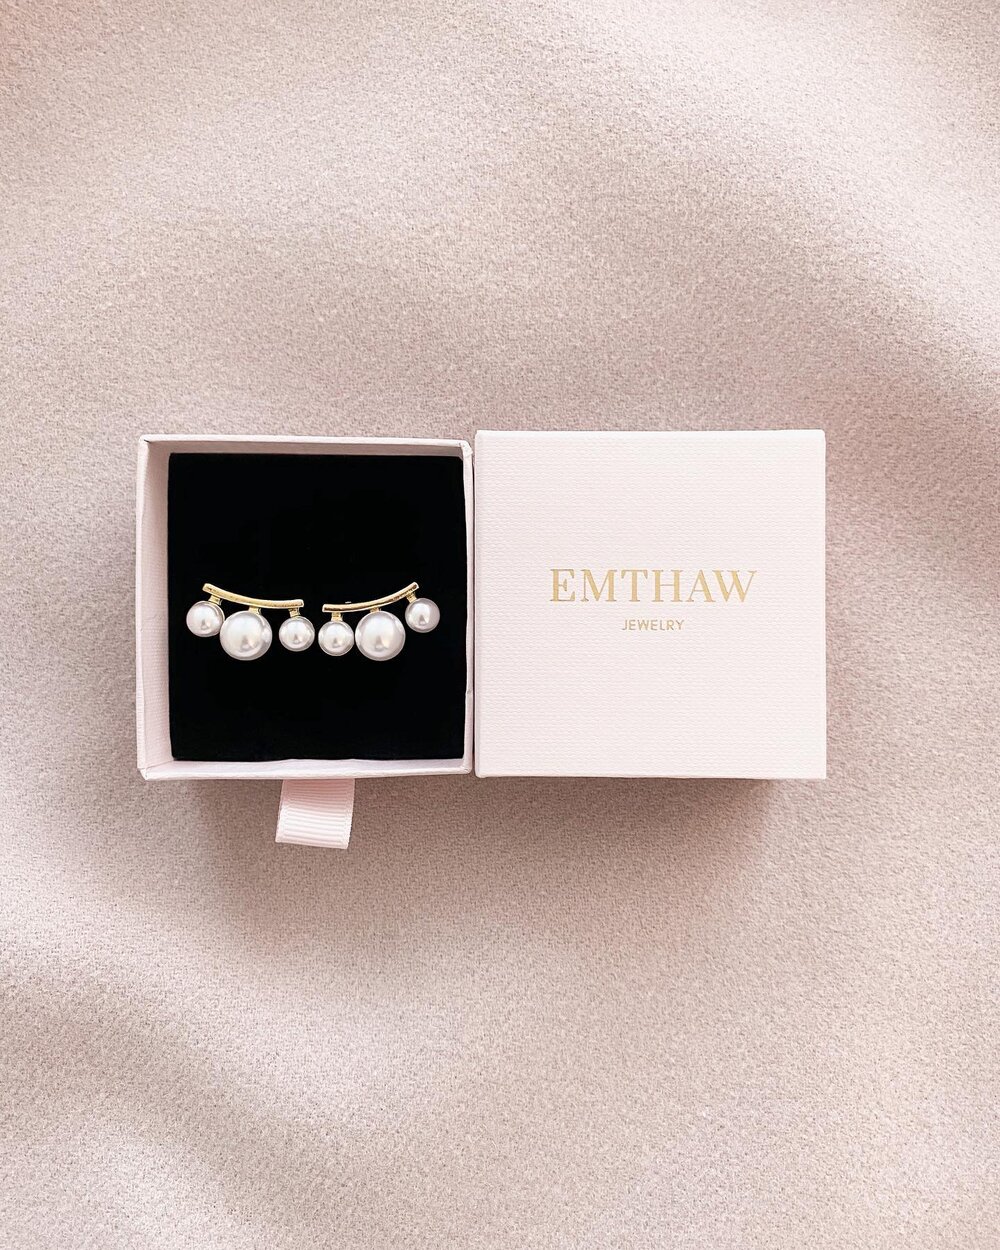 What&rsquo;s better than pearls? Triple pearls. 

What&rsquo;s even better than that? The Olivia Earrings are on sale for $30, all weekend. 

Free U.S. shipping is included &ndash; no code necessary. 

Shop now at
www.emthaw.com #shinemore✨